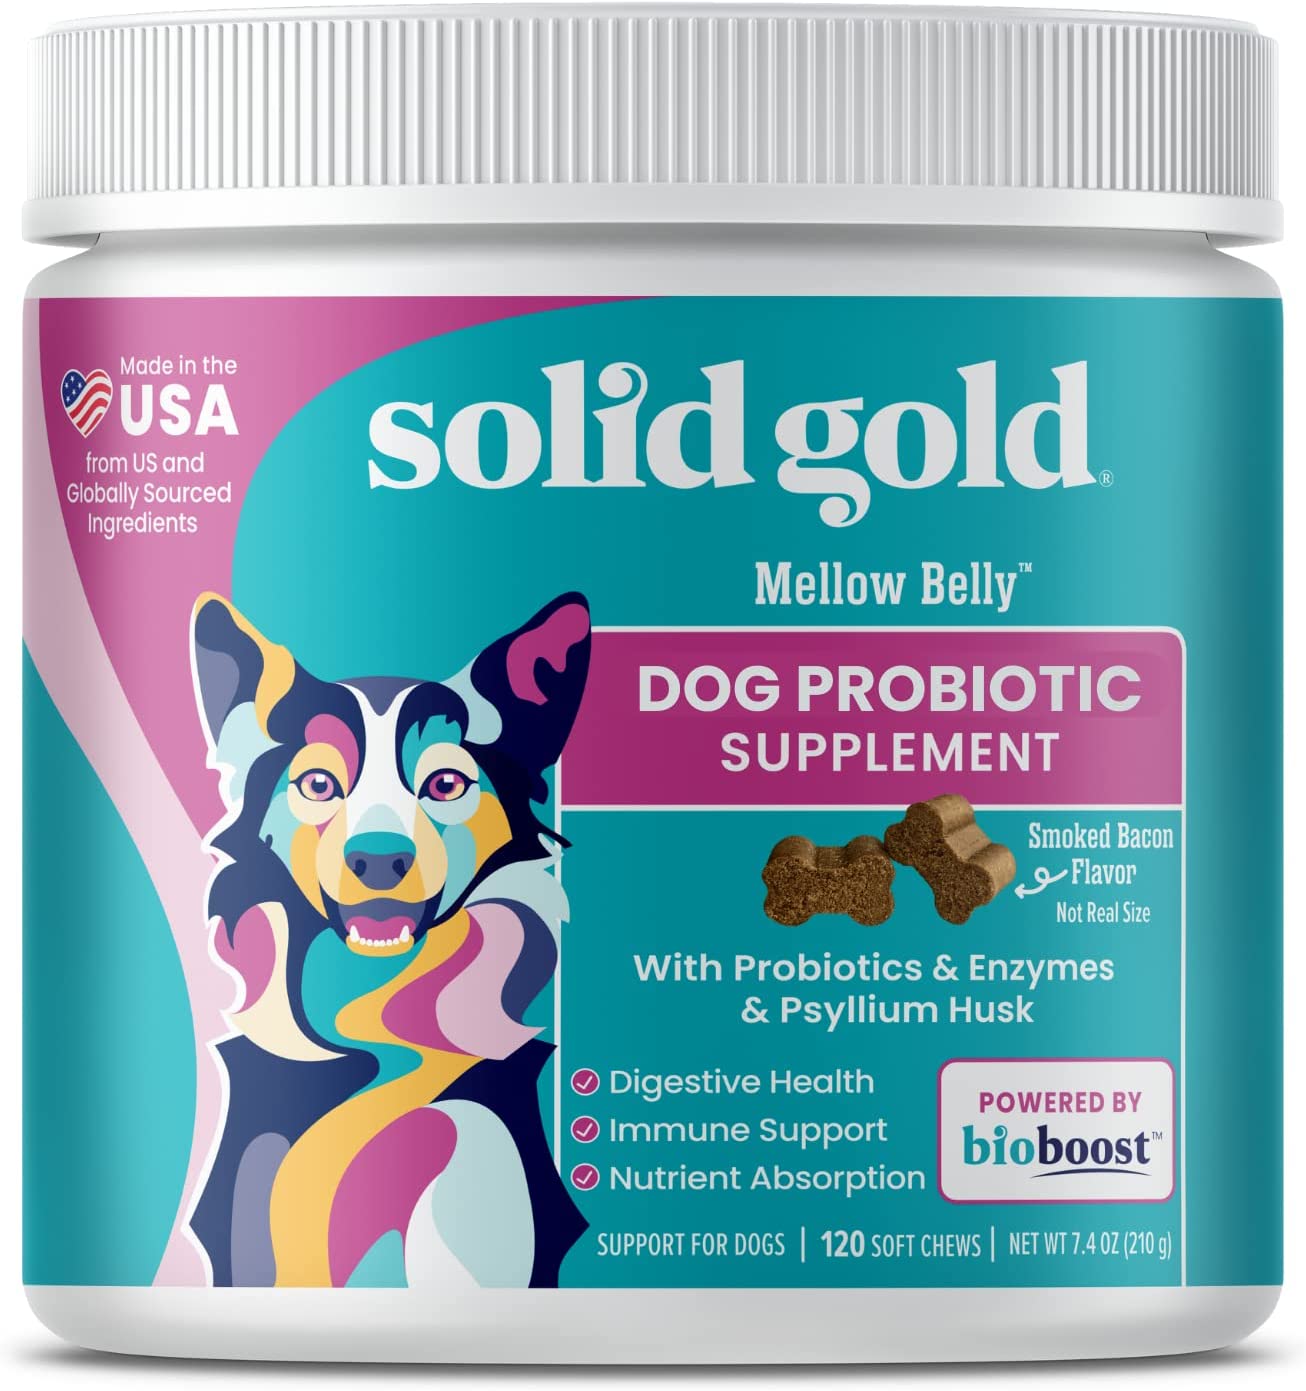 New Solid Gold Dog Probiotic Chews - Bacon Flavor Soft Chews for Dog Digestive Support - Mellow Belly Probiotic for Dogs with Fiber & Digestive Enzymes for Bowel Support, Gas, & Constipation - 120 Count